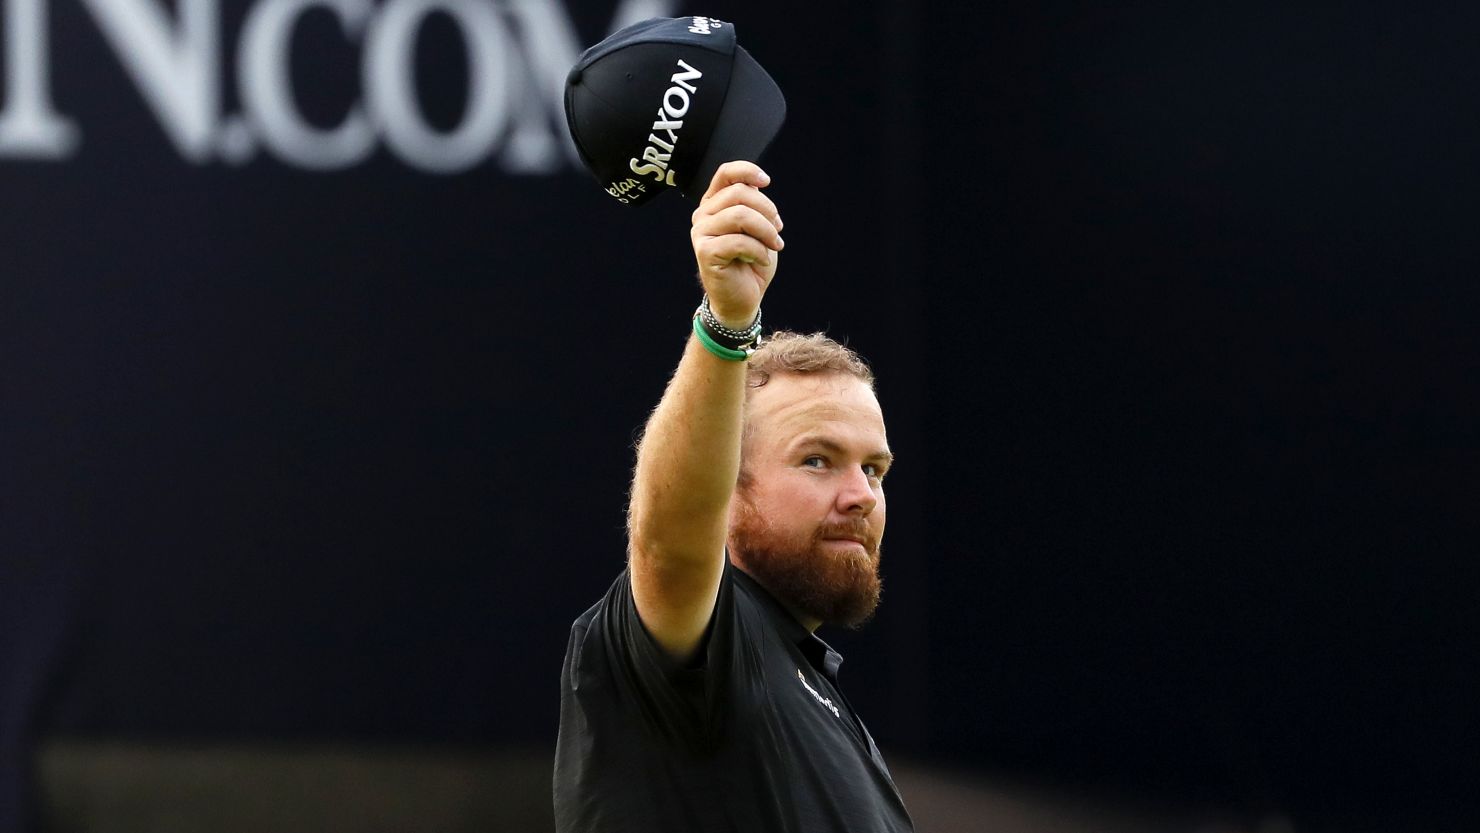 Ireland's Shane Lowry leads the Open by four heading into Sunday's final round.